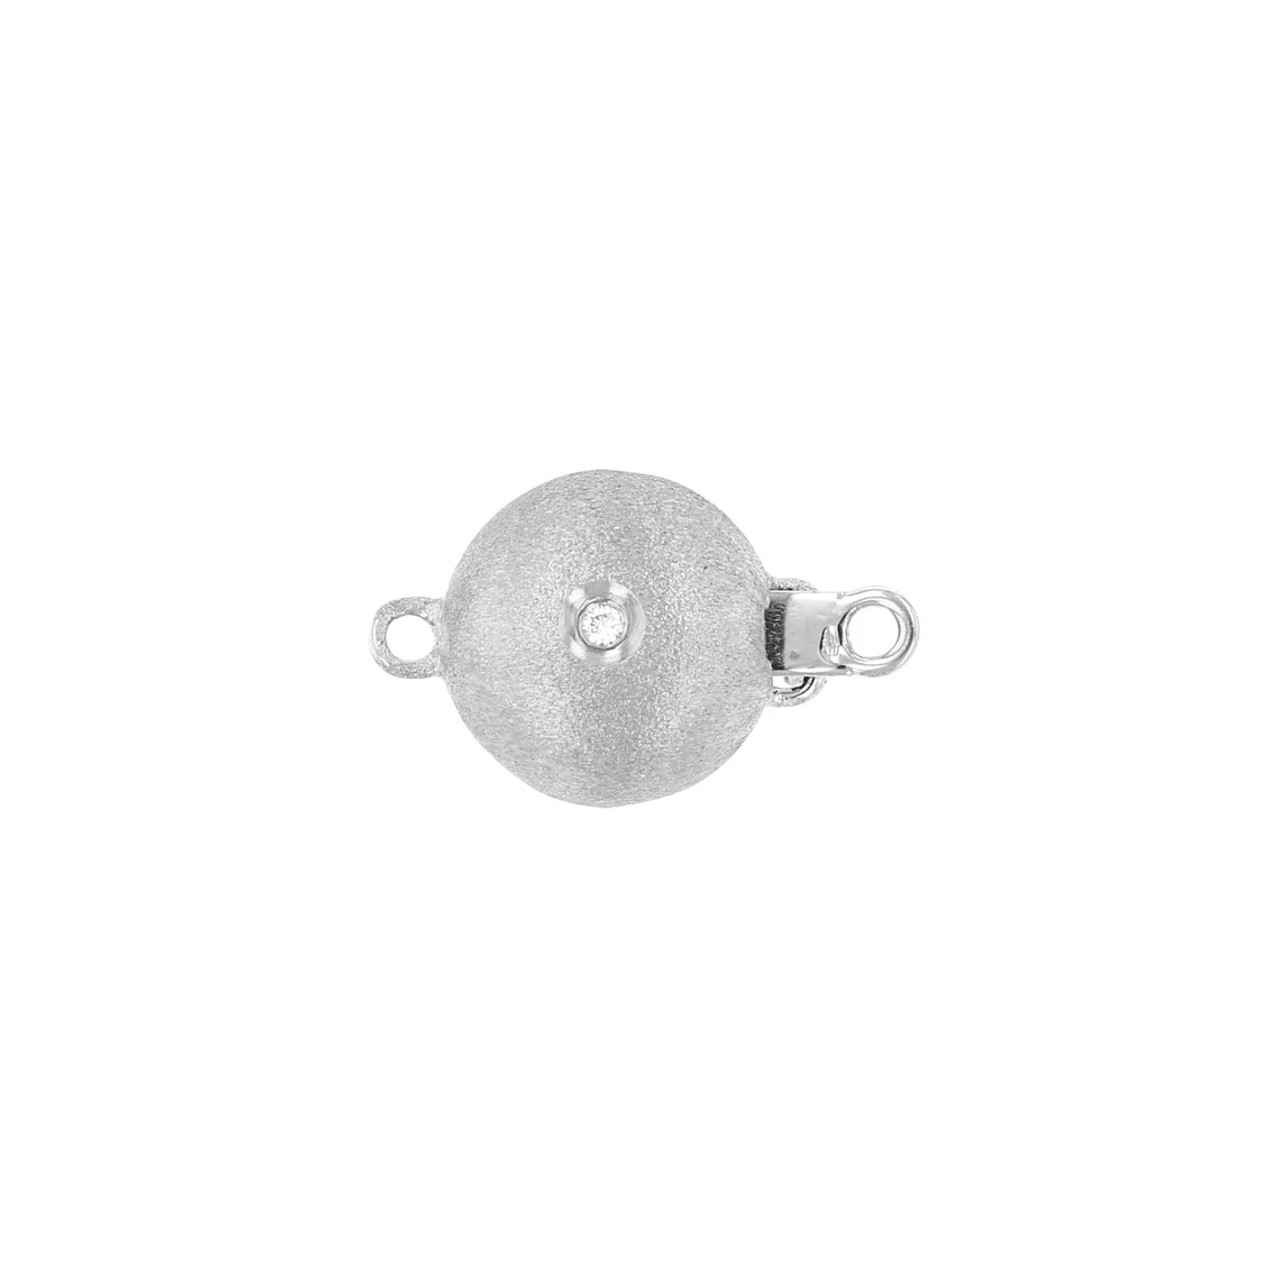 6pcs Round Ball Glue-in End Magnetic Jewelry Clasps - Silver Plated Copper 9x15mm Clasp Making Beading Supplies 2634FD